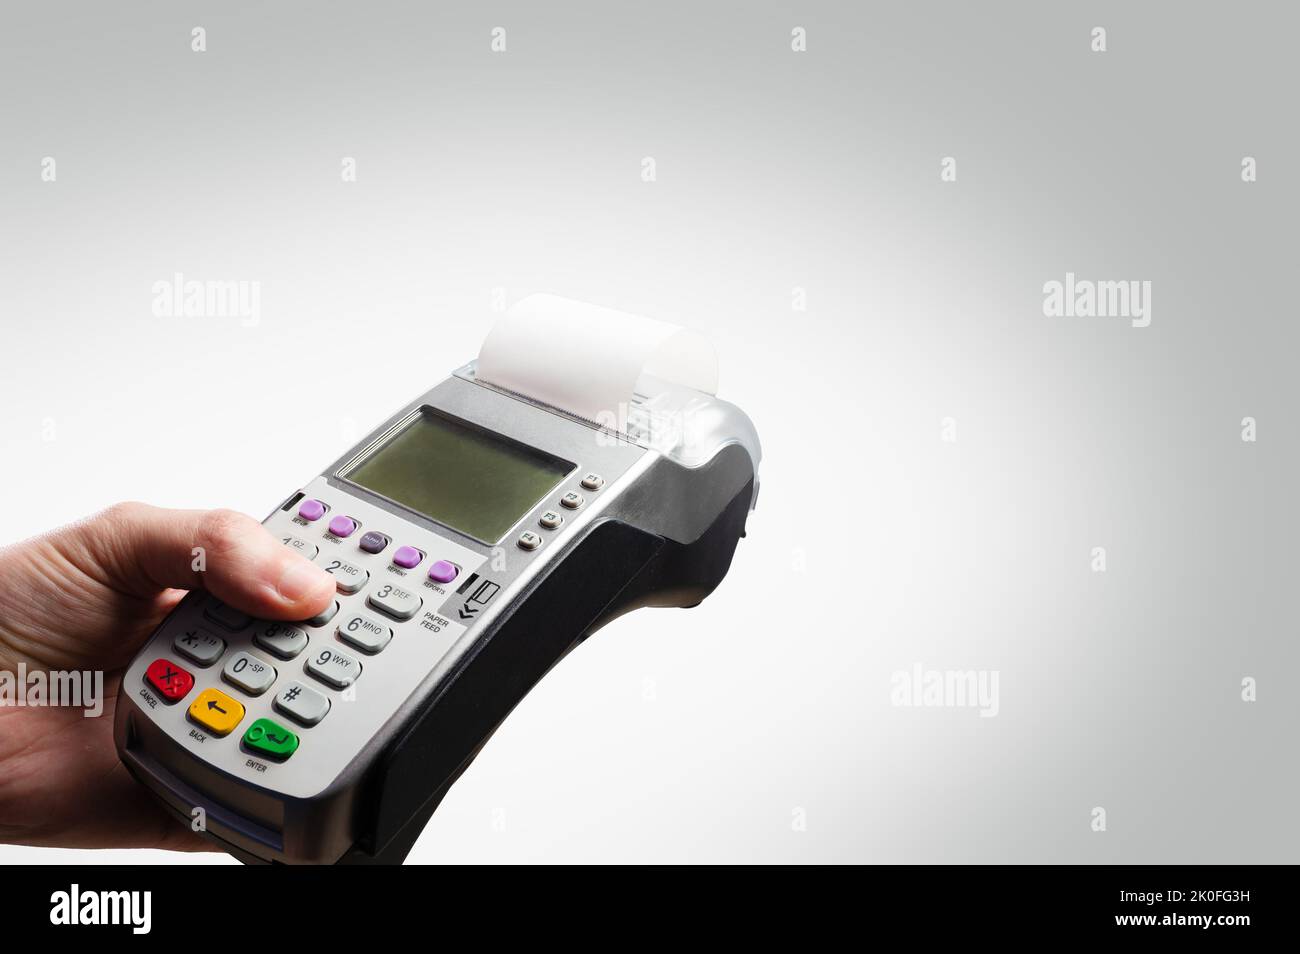 Cash terminal in a man's hand on a white background. Wholesale and retail purchases, sales, banking and credit cards, services. Minimalism. There is f Stock Photo